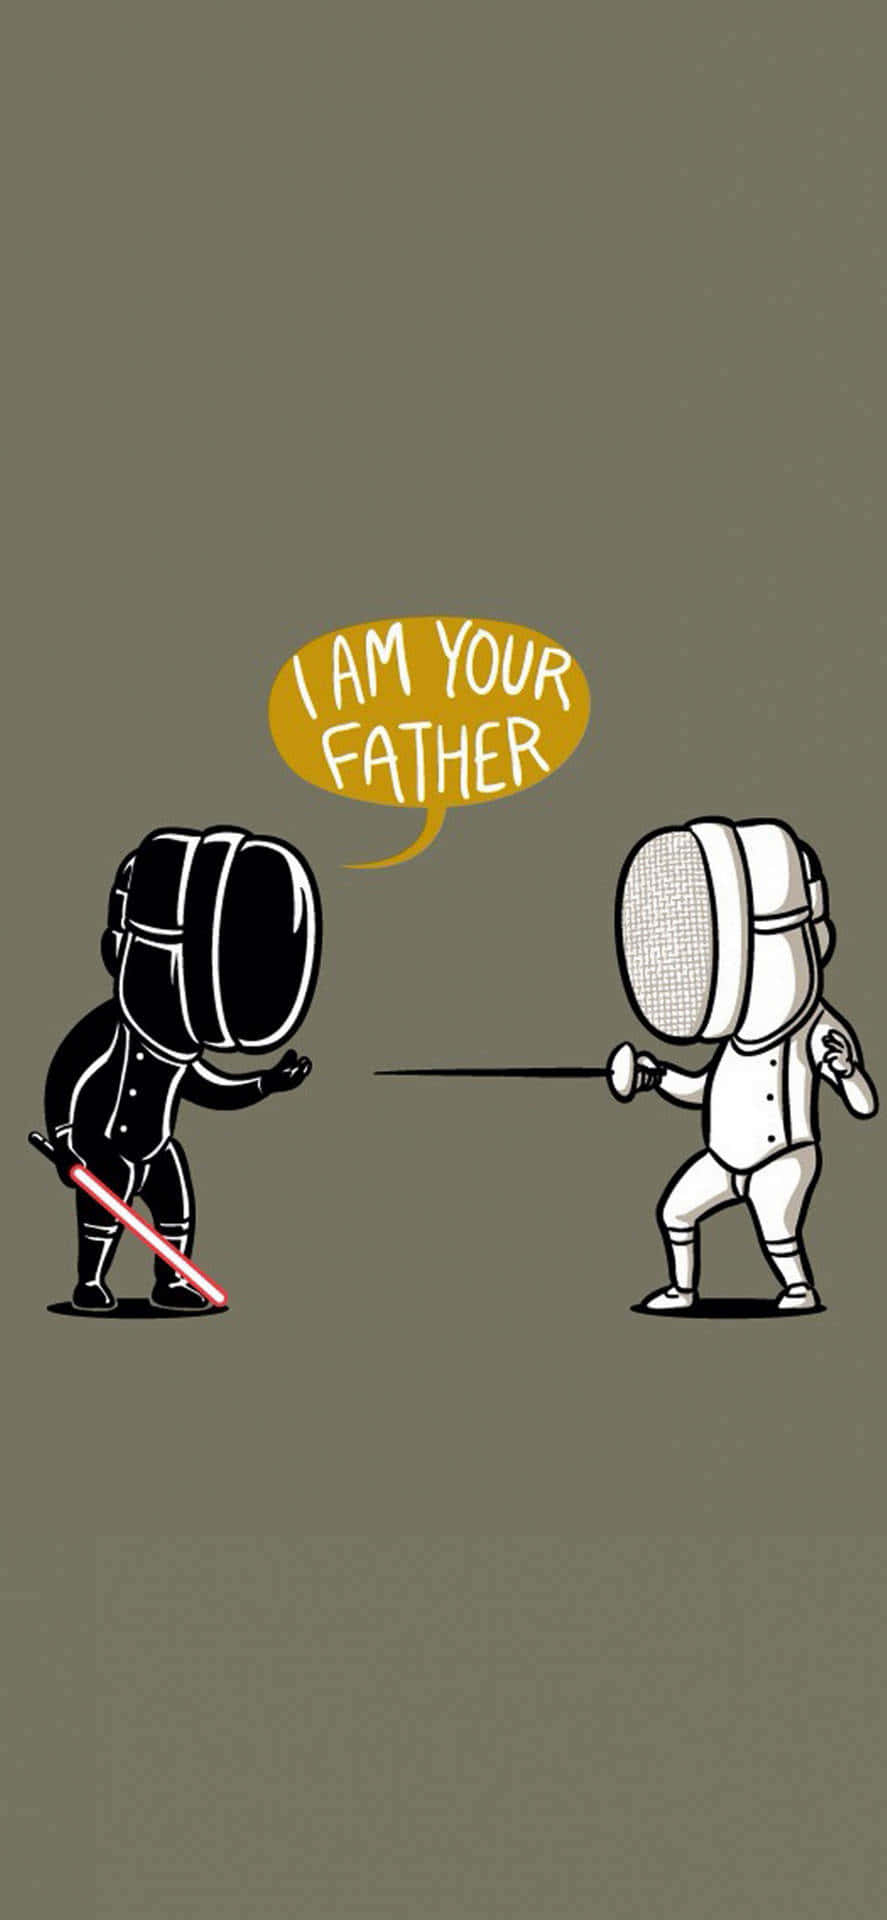 Funny Star Wars - For true fans of the franchise Wallpaper